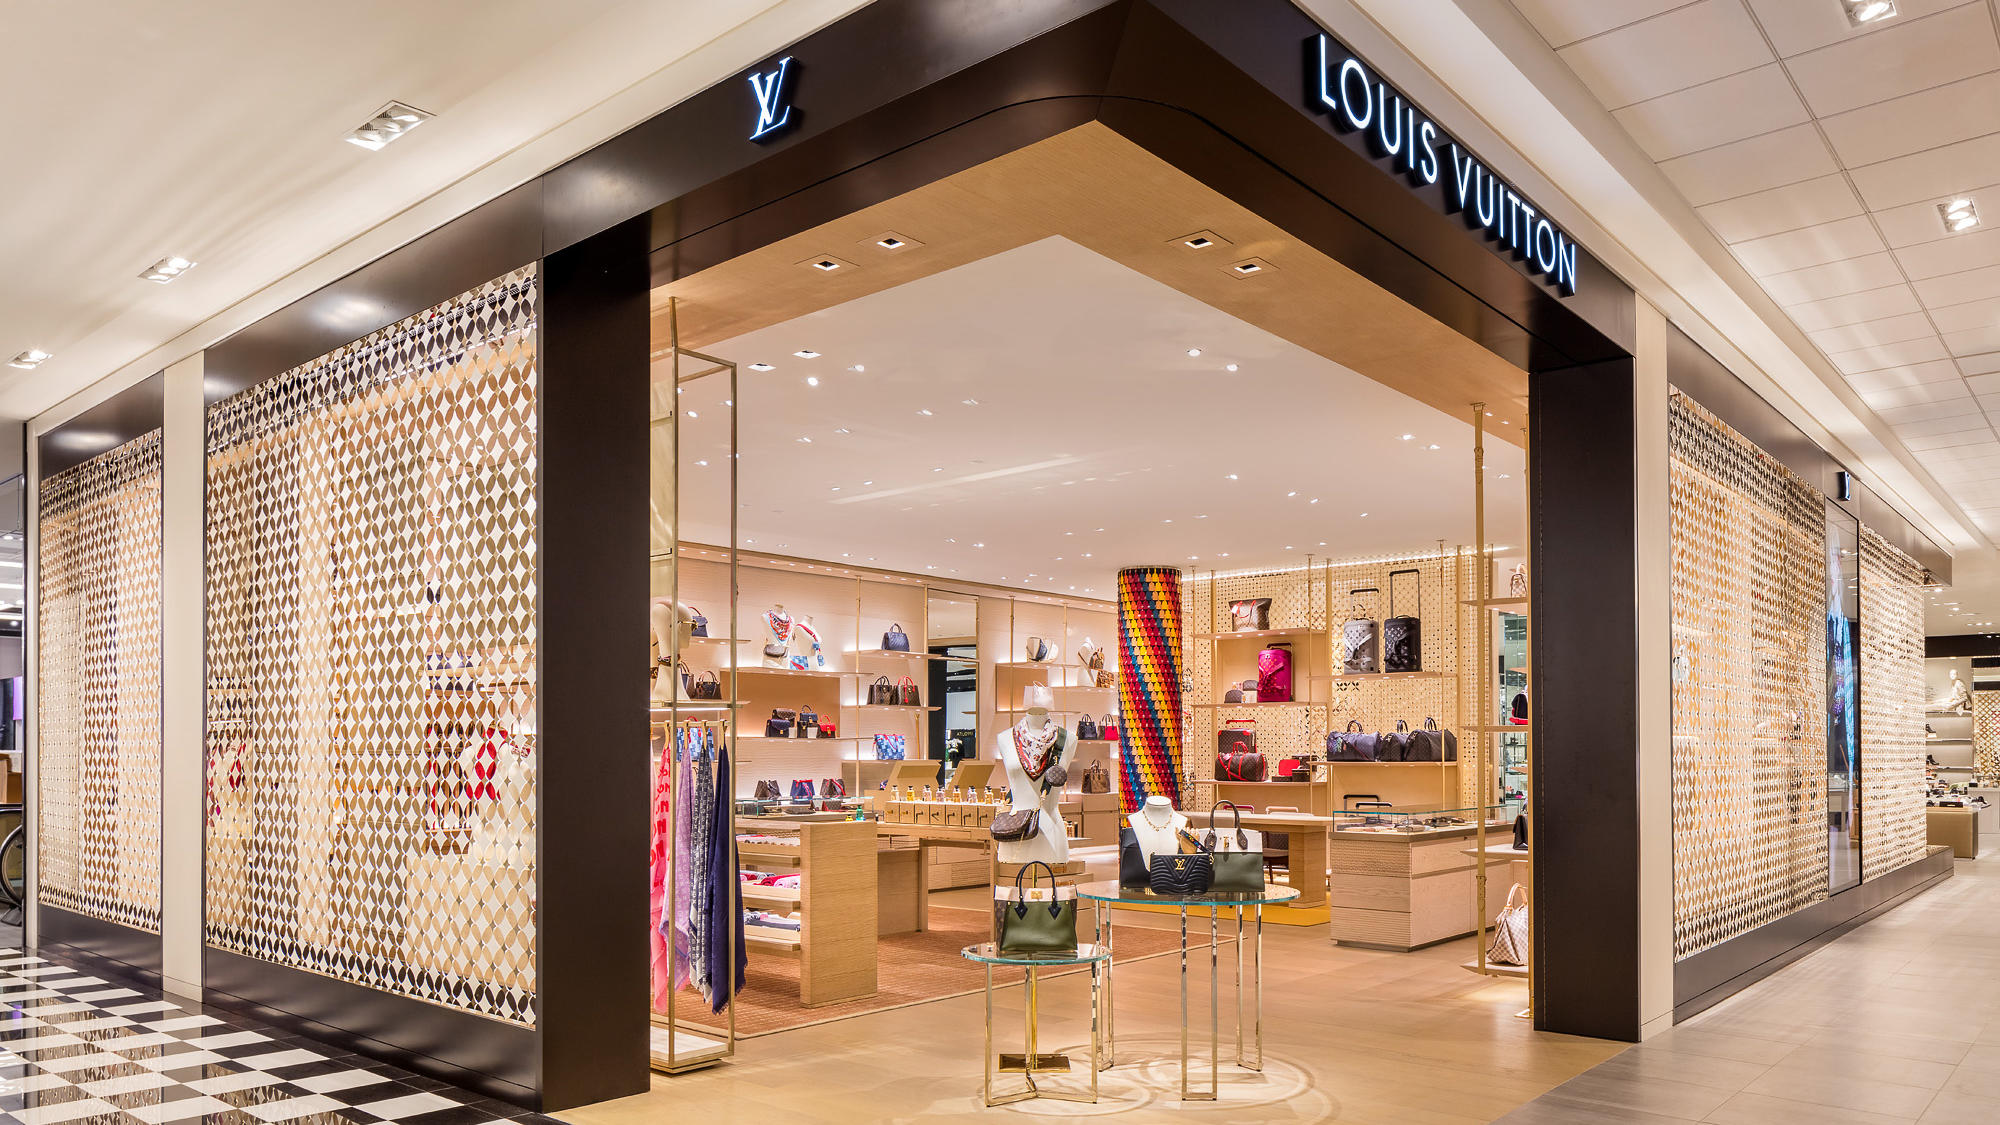 Louis Vuitton Bloomingdale's Valley Fair Store Front, located on the Ground Floor